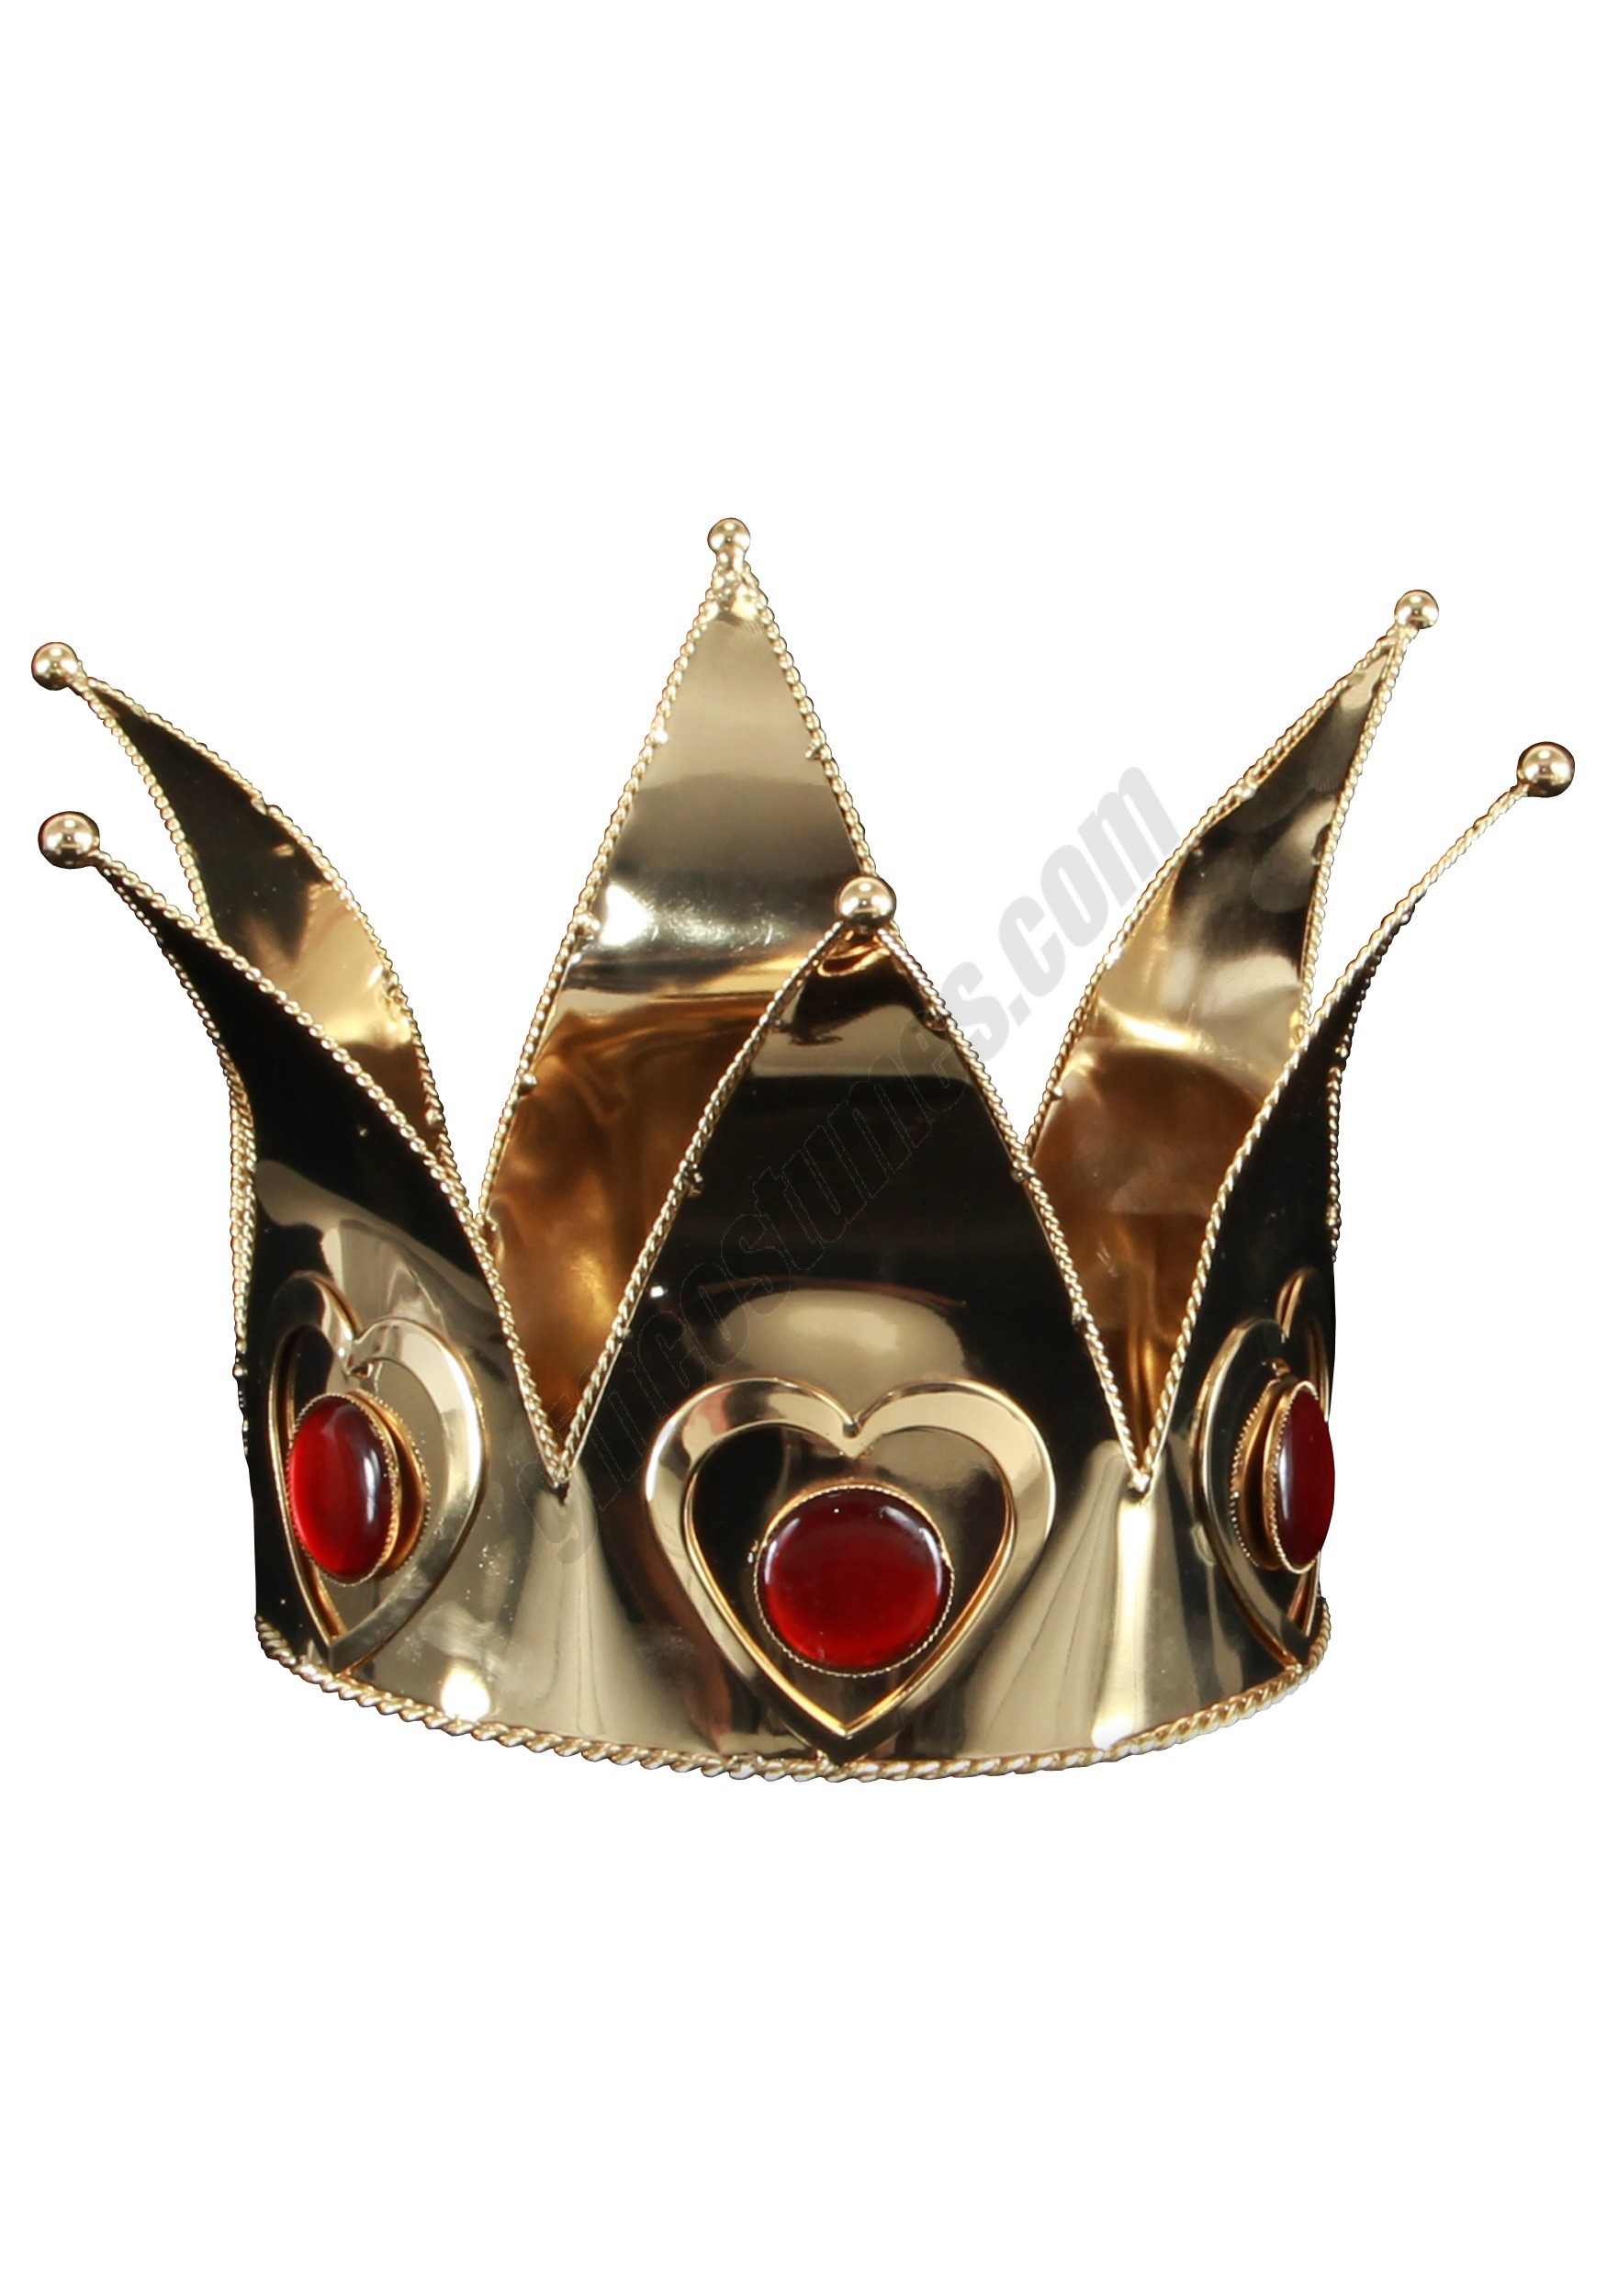 Mini Queen of Hearts Crown Promotions - Mini Queen of Hearts Crown Promotions